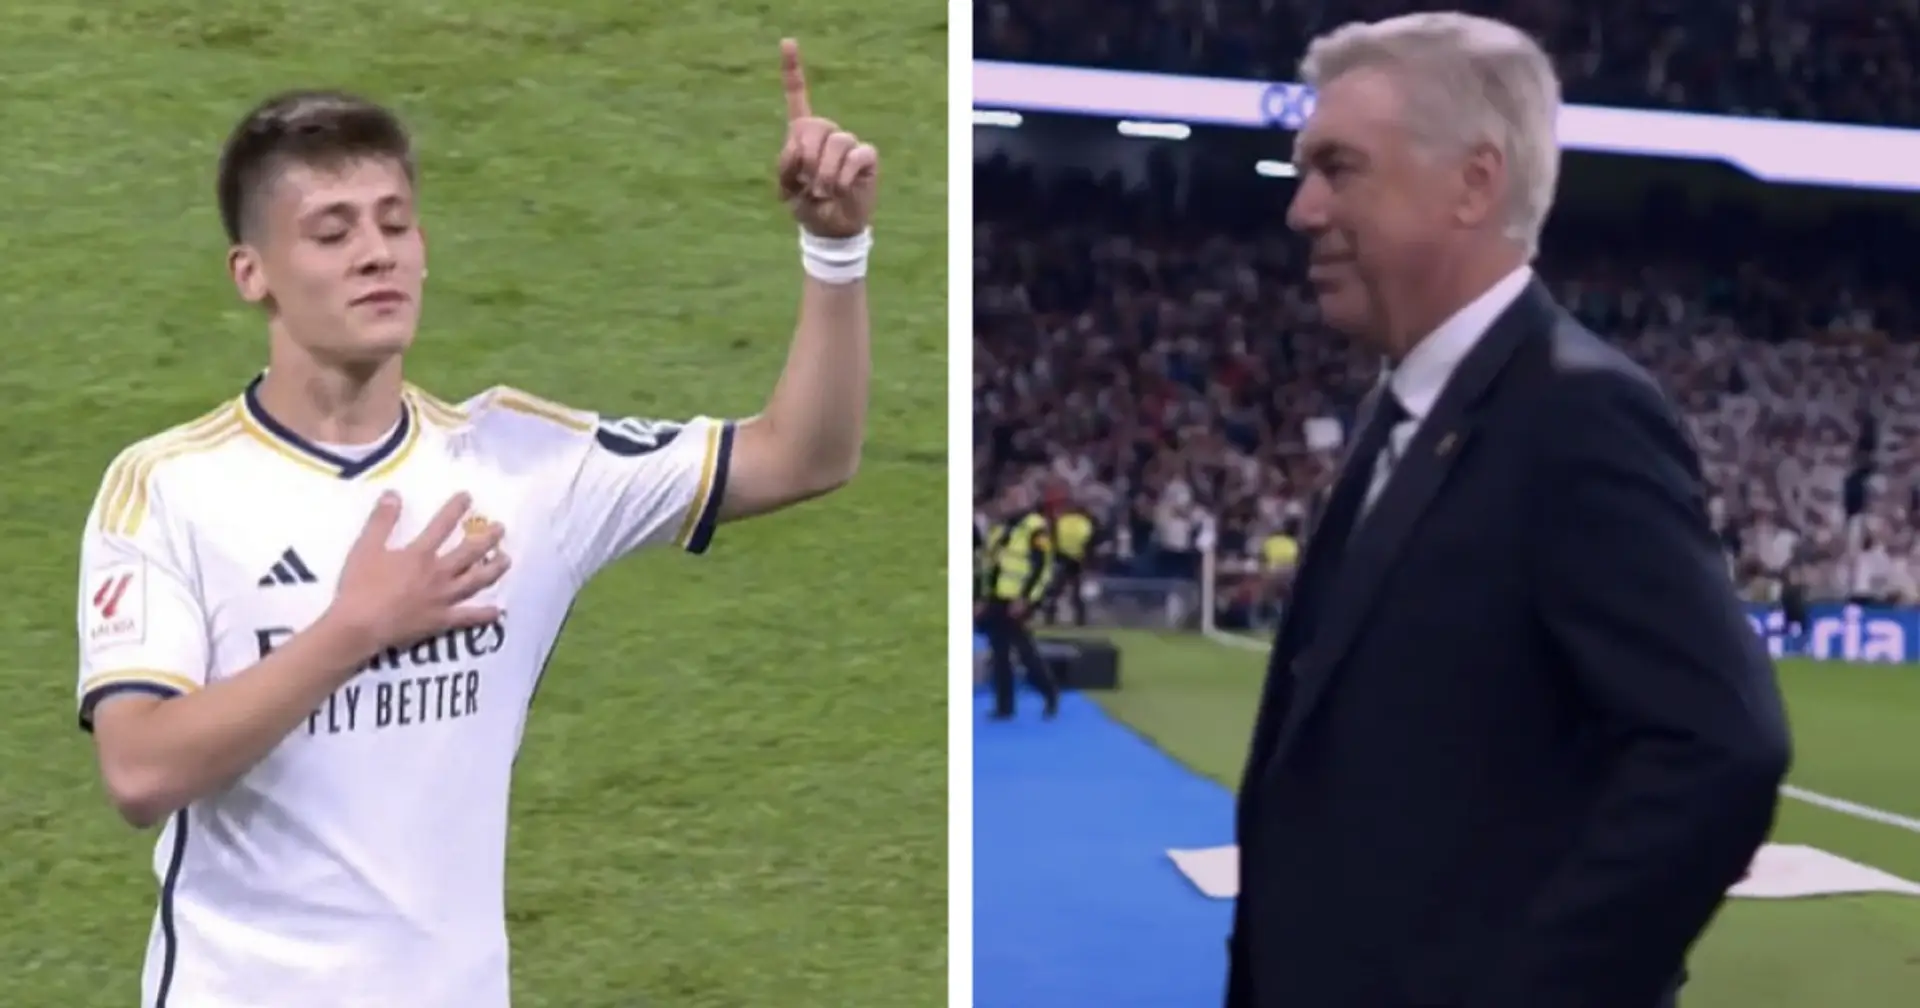 Carlo Ancelotti reaction to YET ANOTHER Arda Guler goal caught on camera